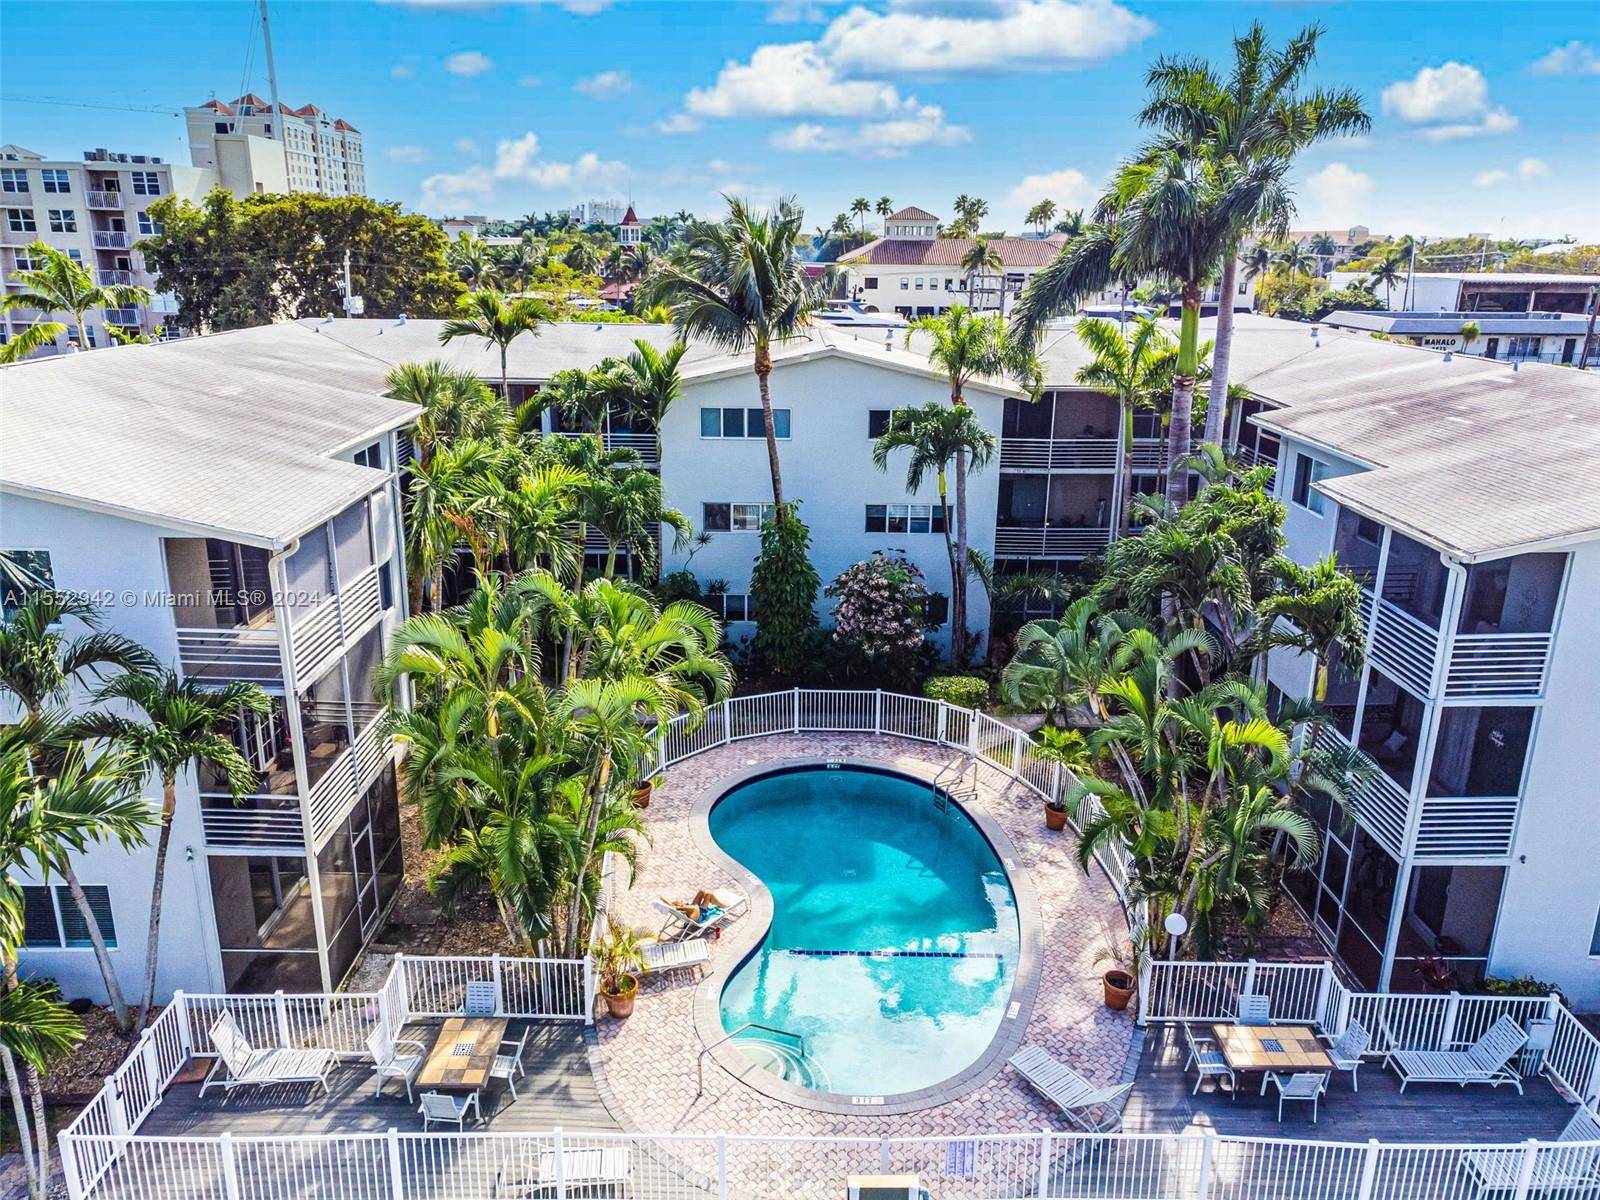 Come live the Florida lifestyle you have been looking for.